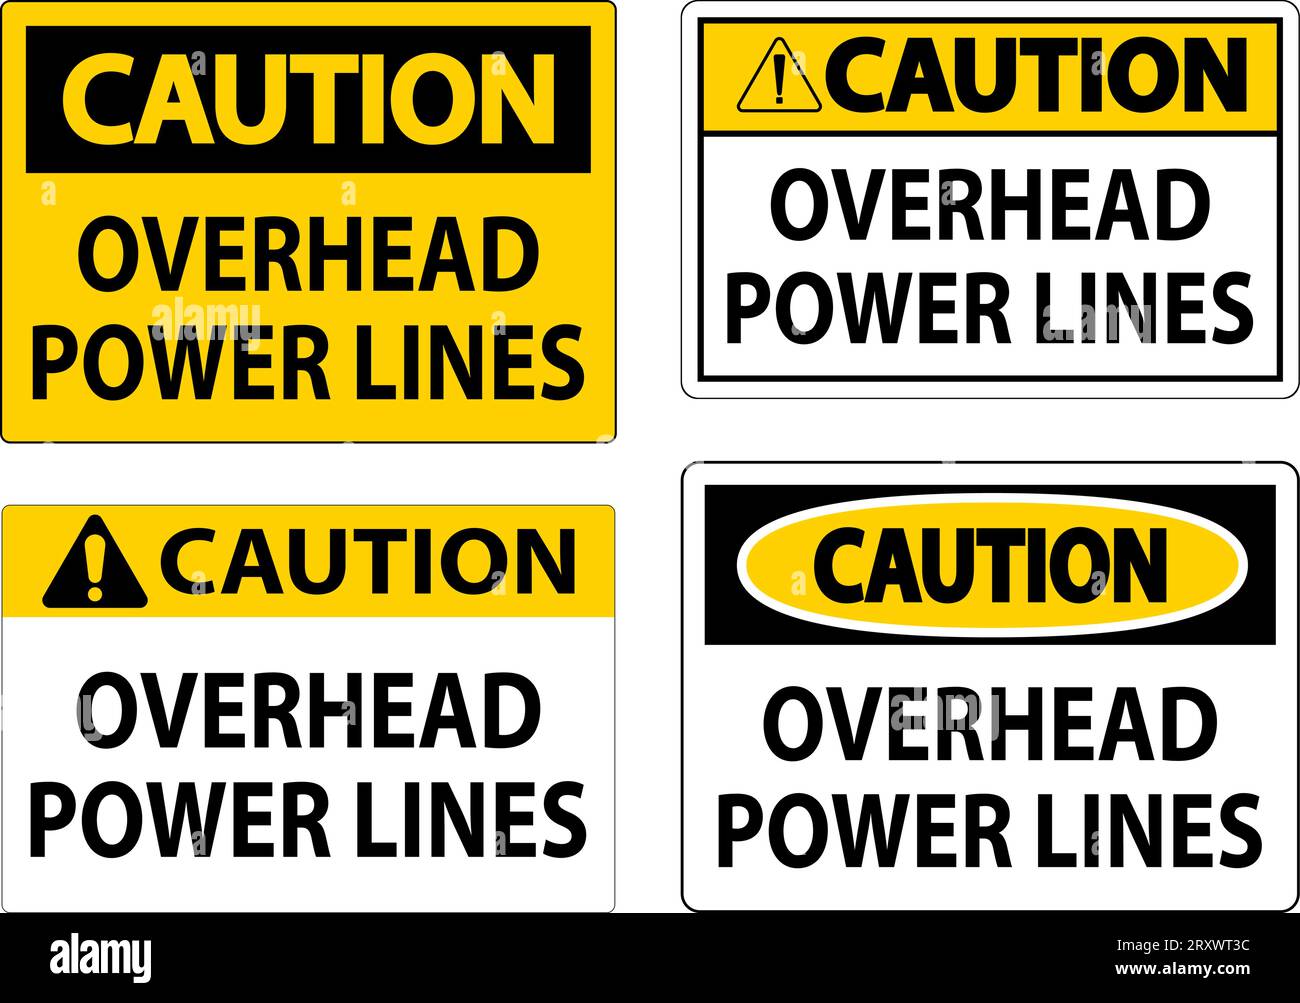 Caution Sign Overhead Power Lines Stock Vector